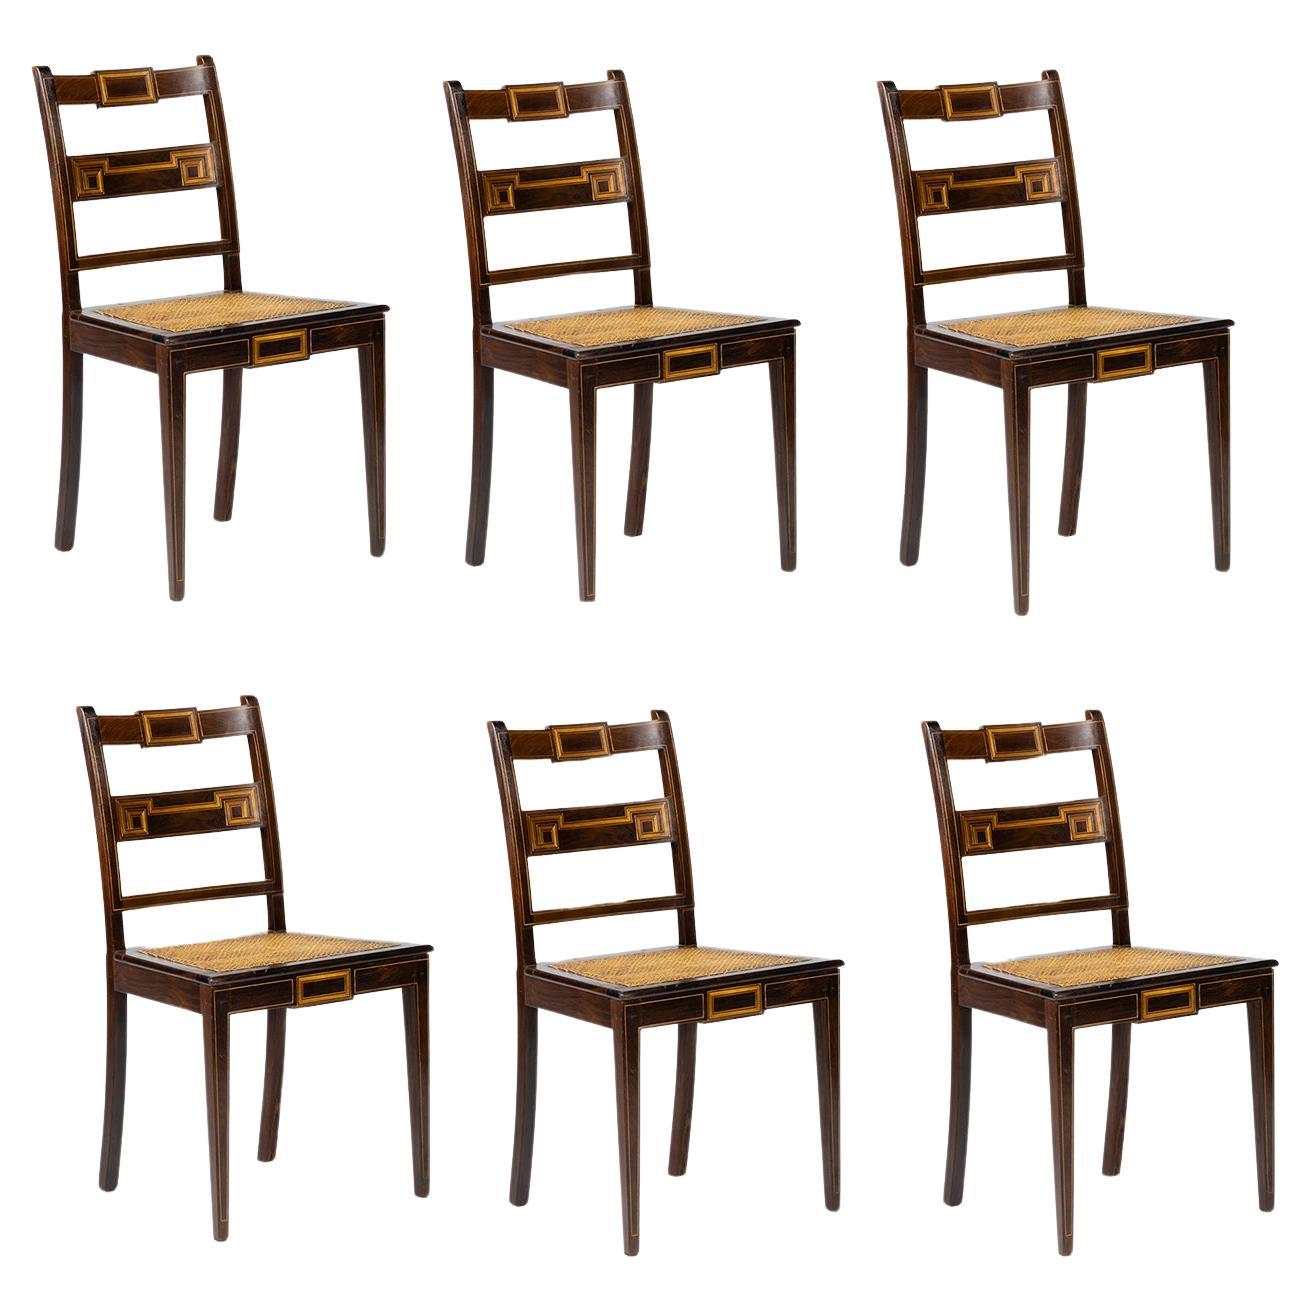 Set of Six Portuguese Chairs, 20th Century